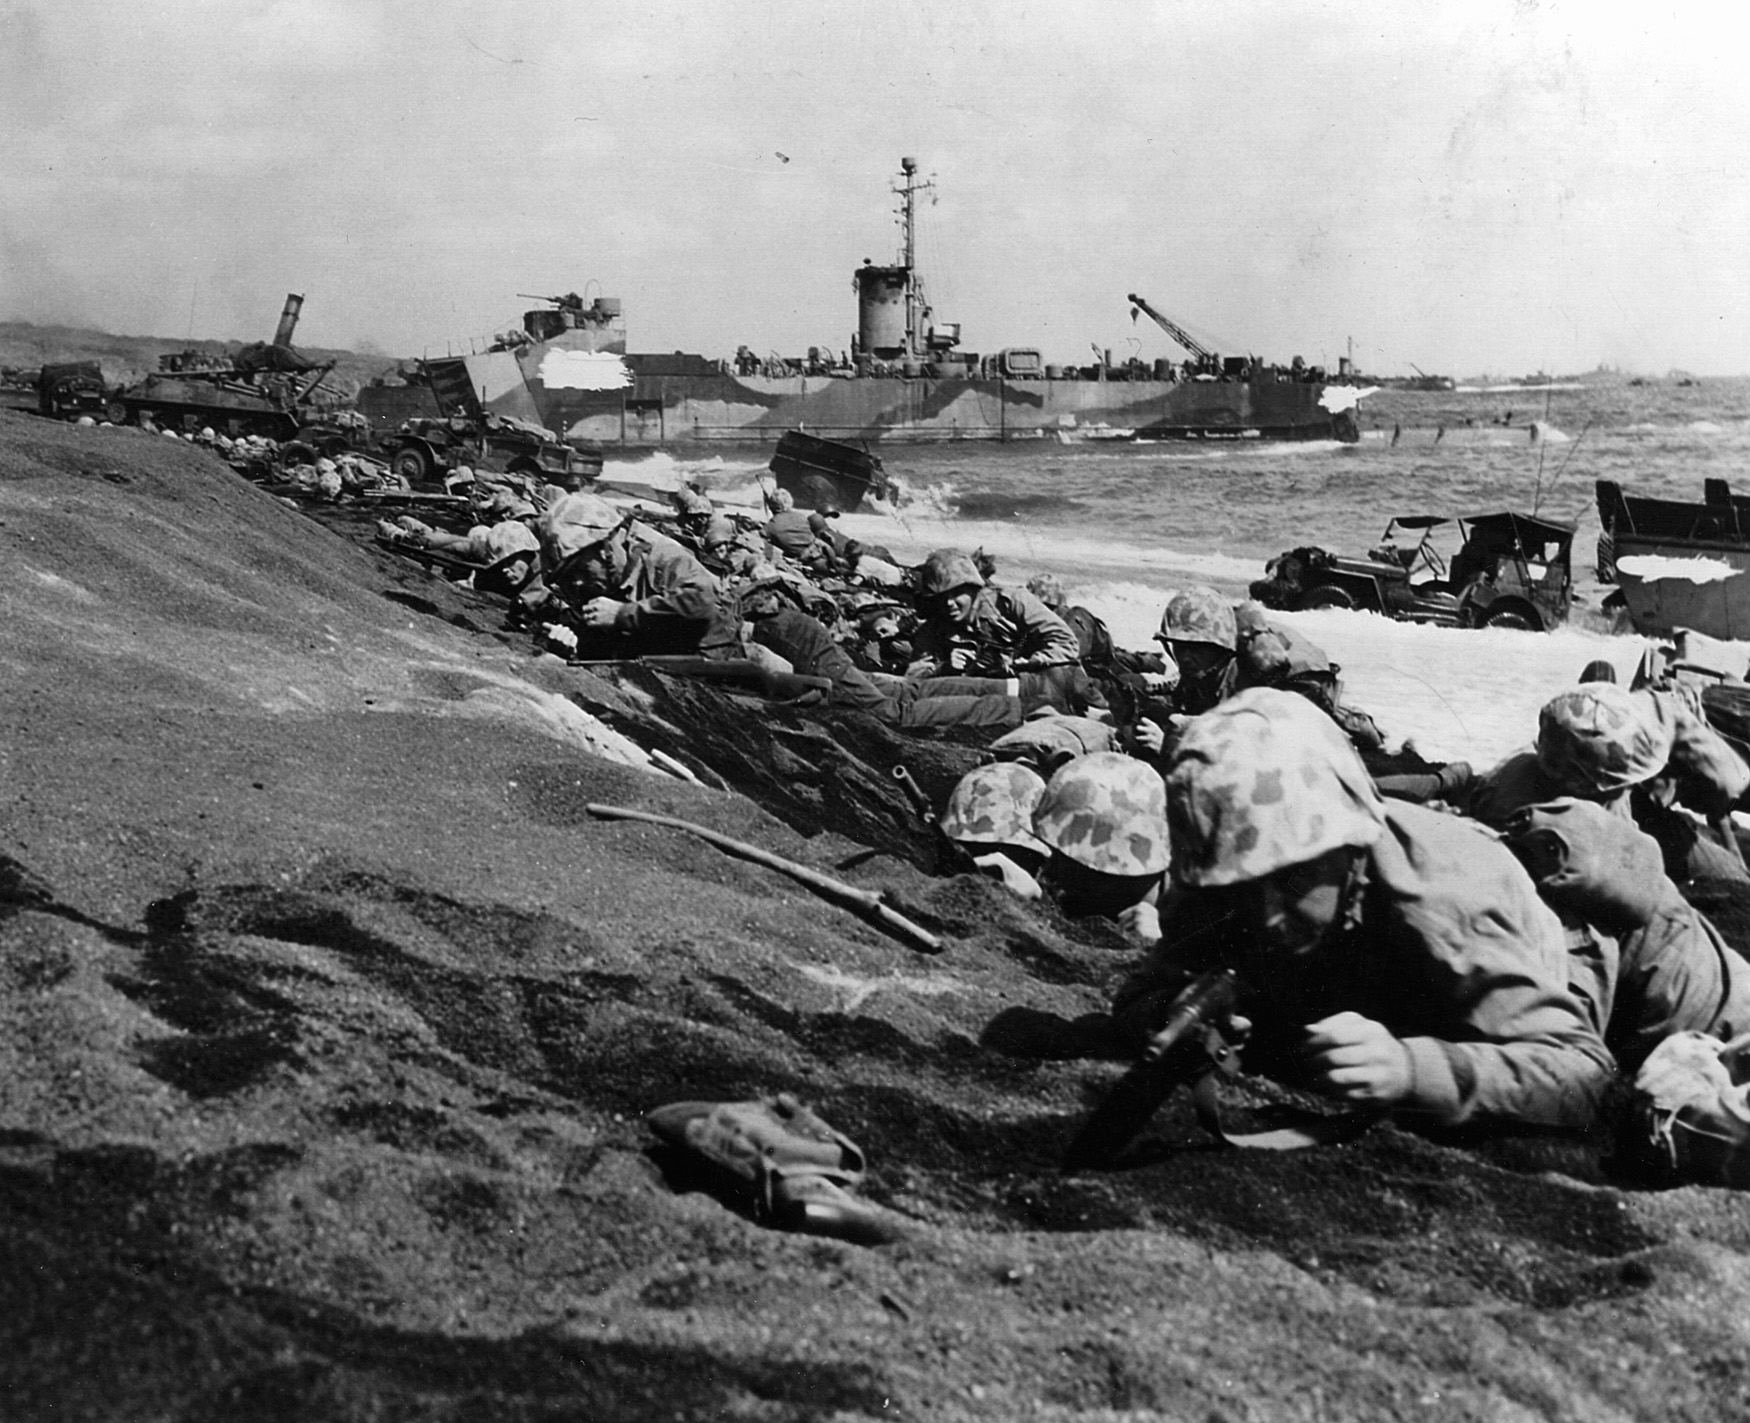 Pacific Theater WWII